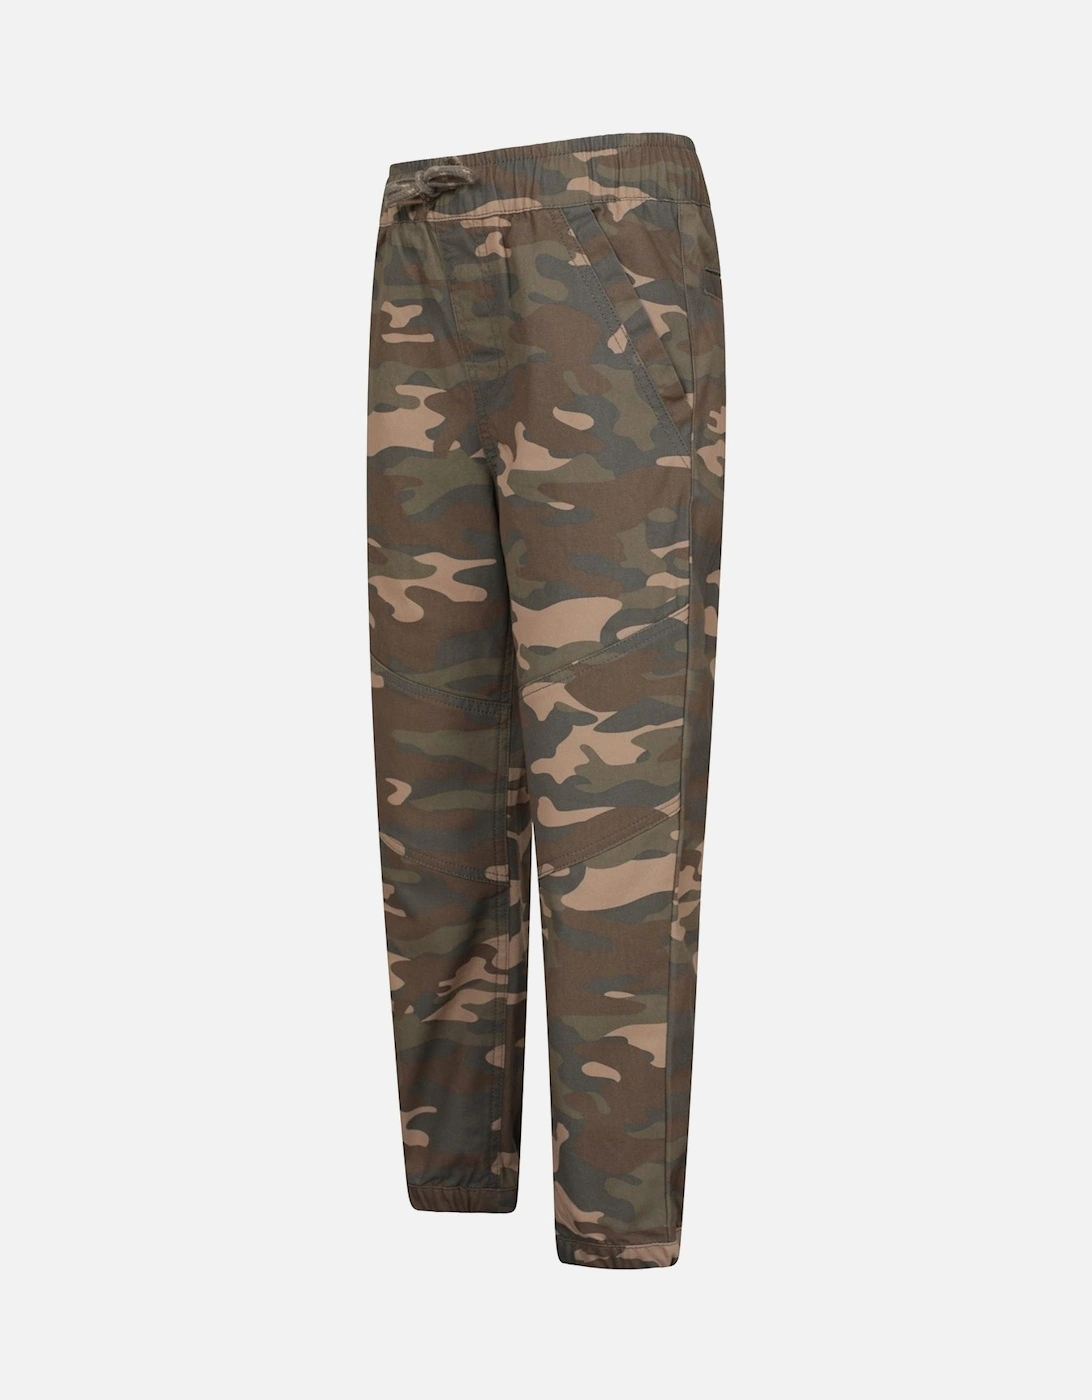 Childrens/Kids Camo Reinforced Knee Trousers